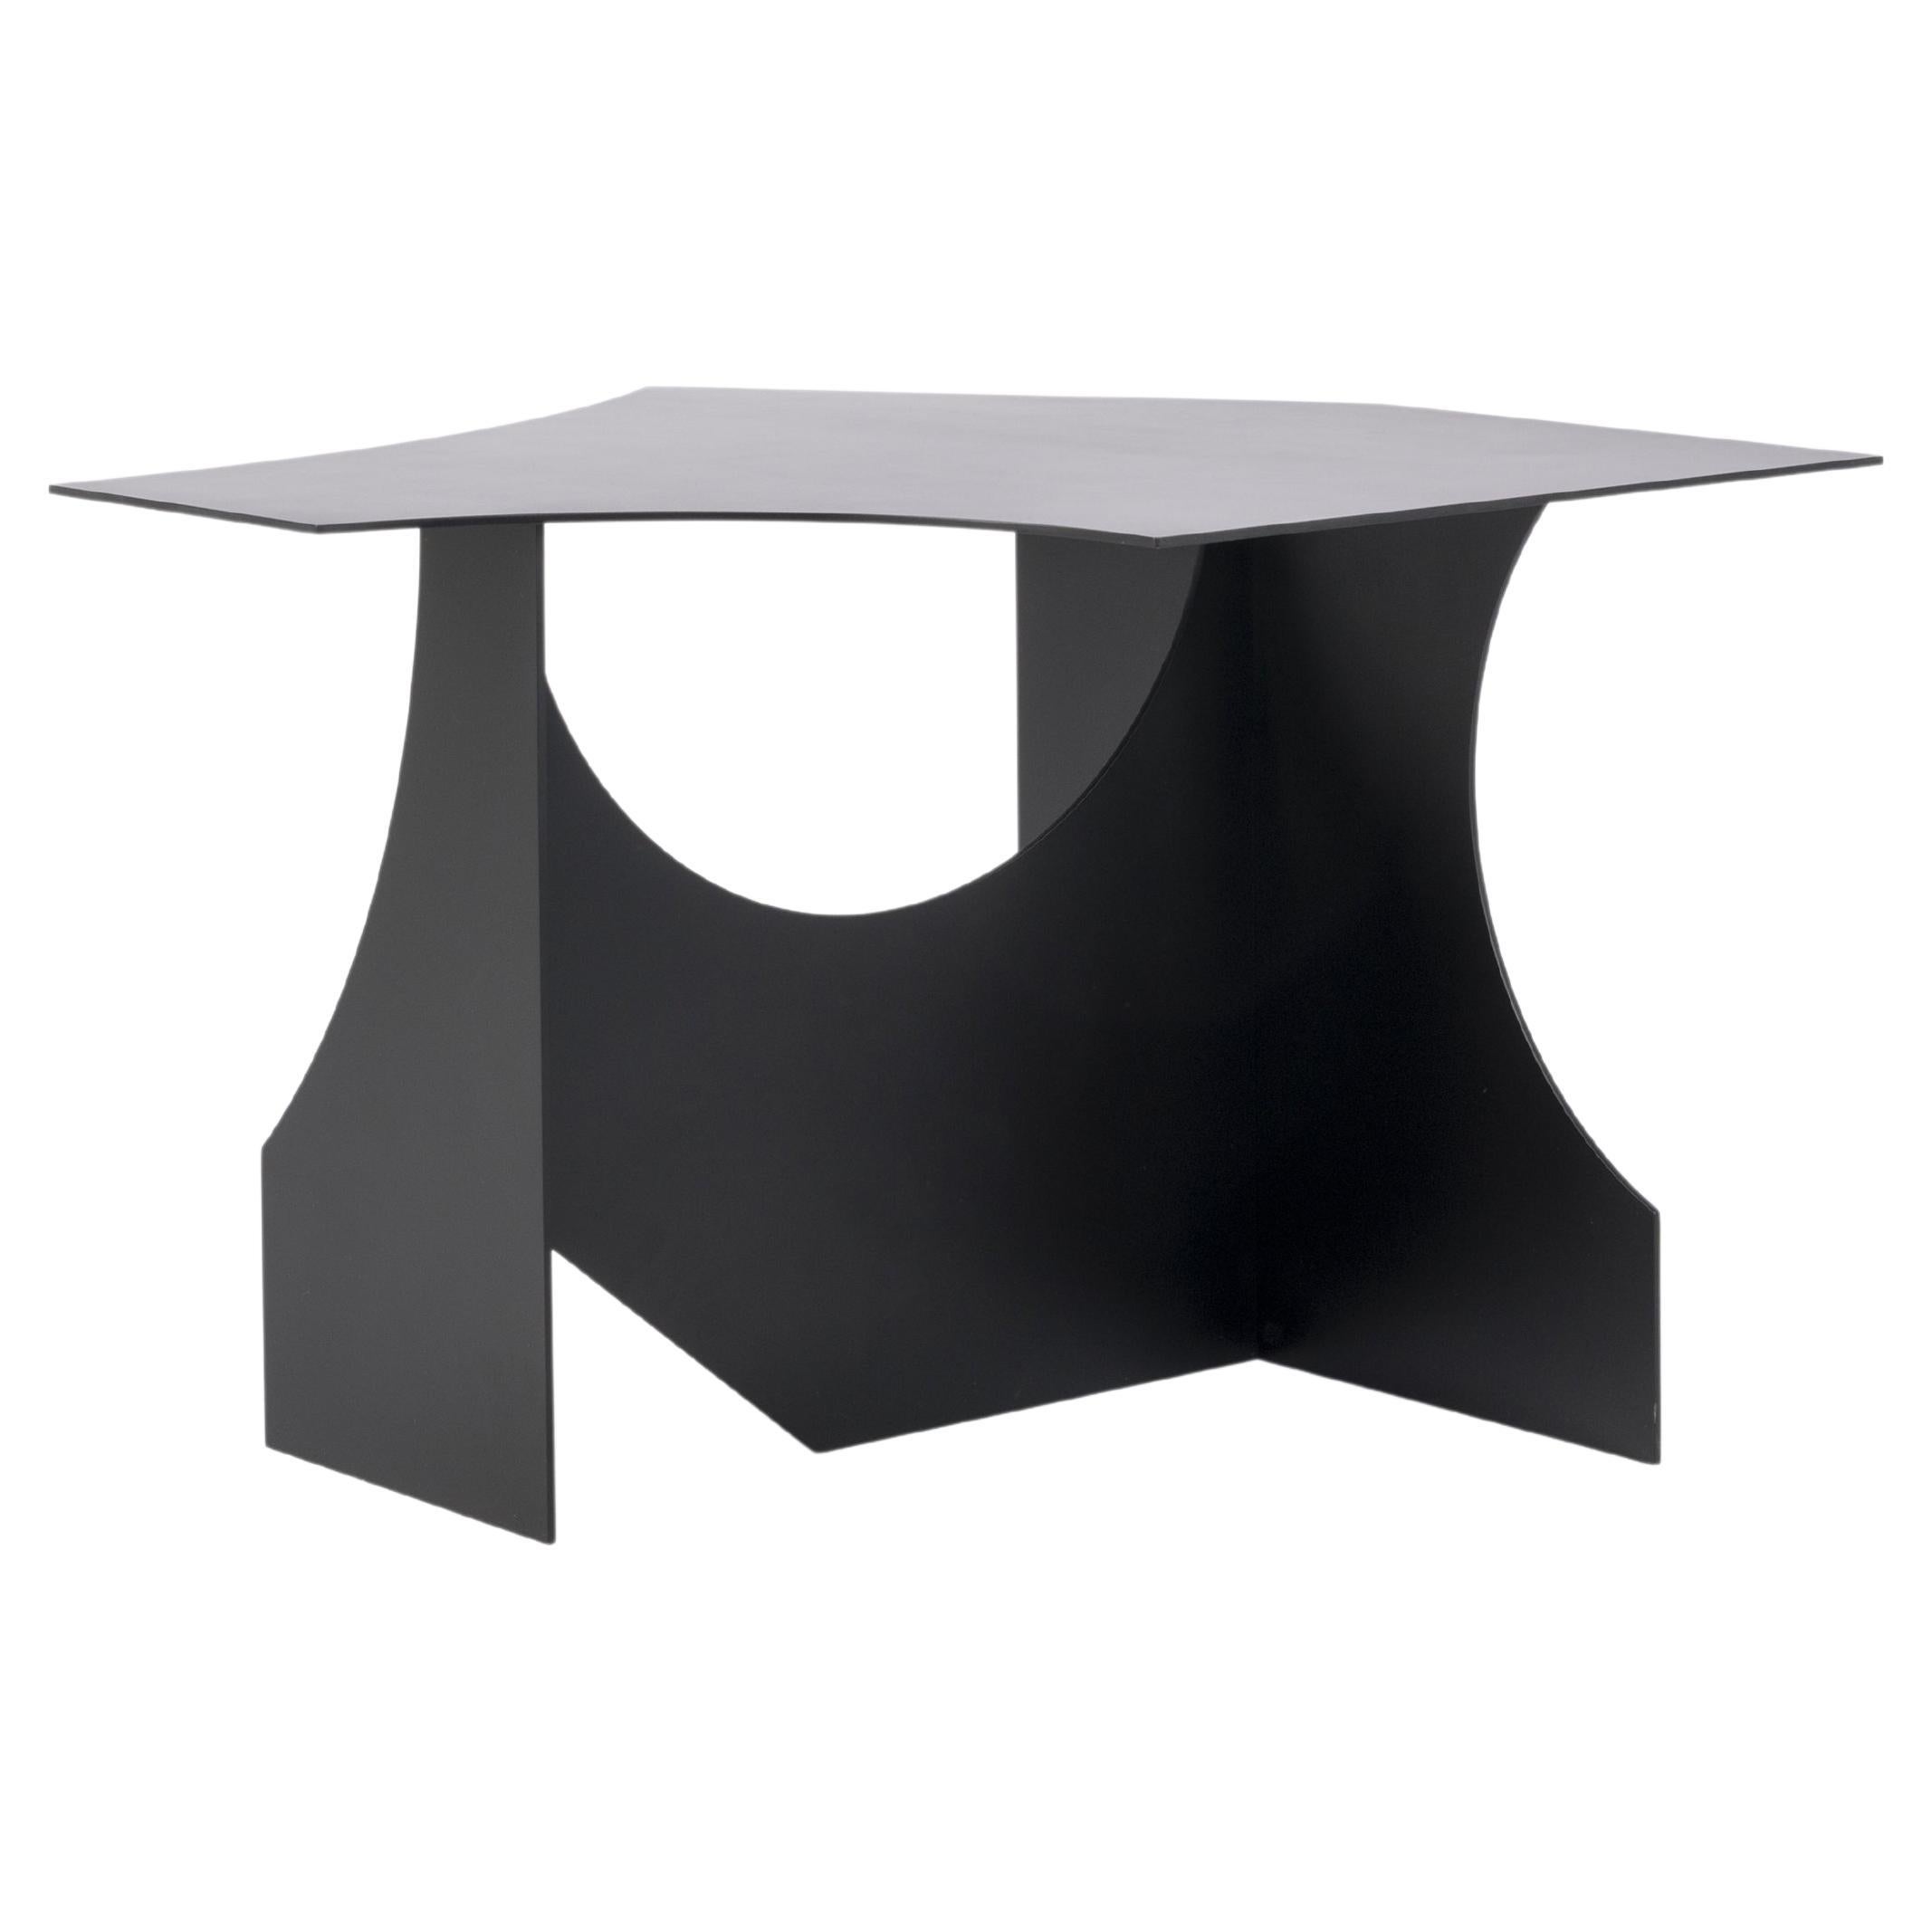 Cutout T03, Contemporary Black Metal Coffee Table by Millim Studio